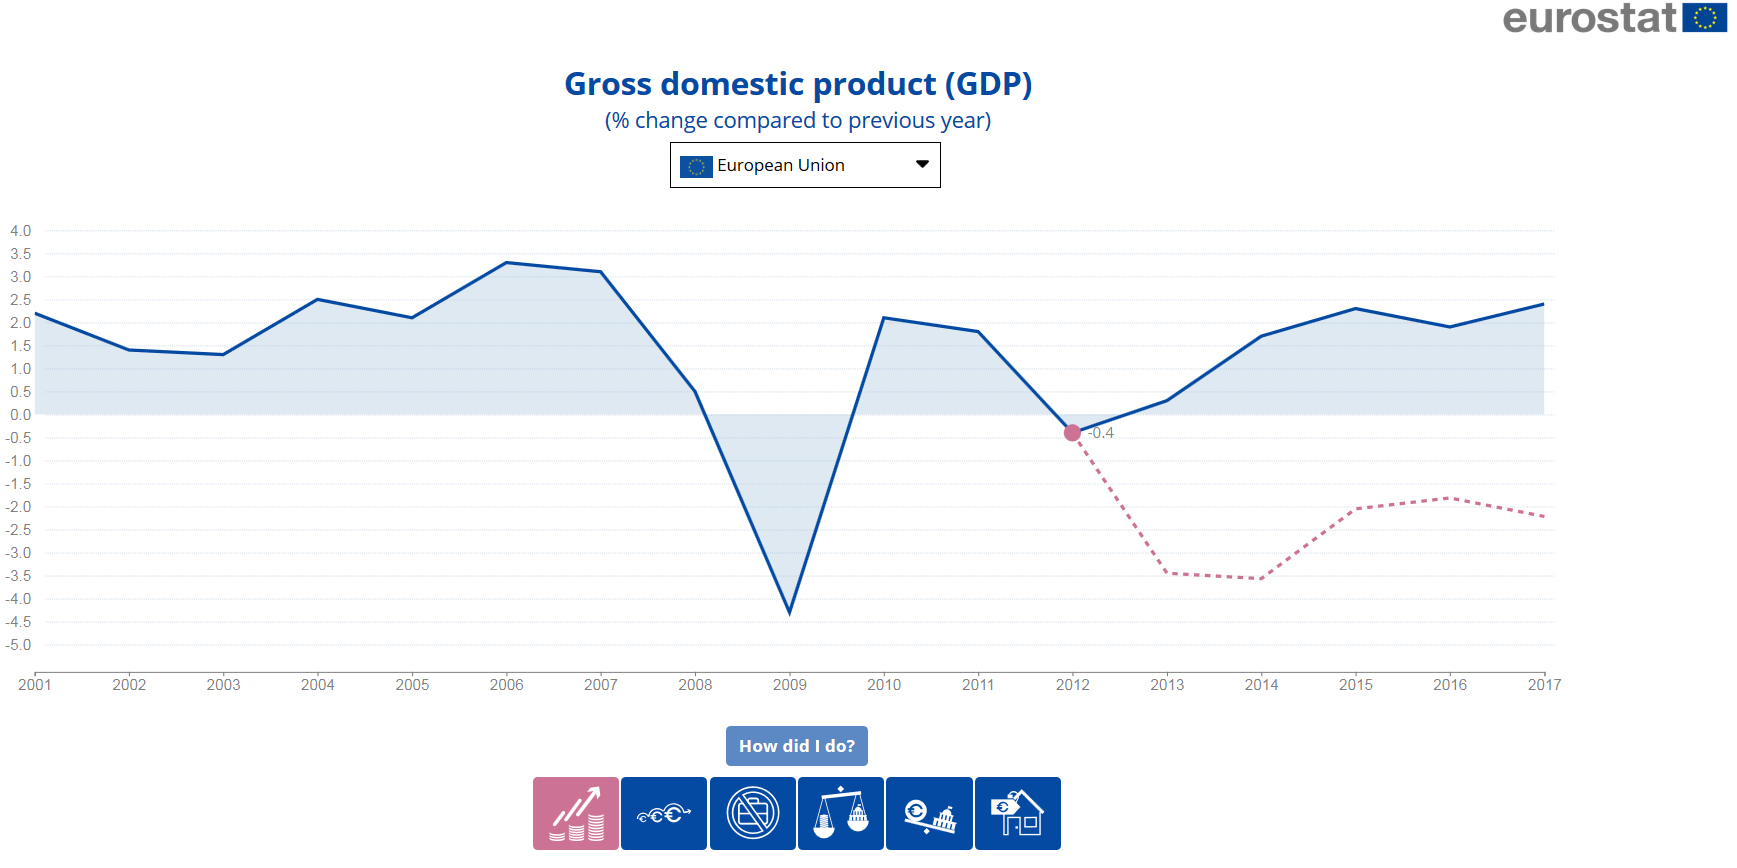 Visualisation tool to compare forecast and actual GDP figures